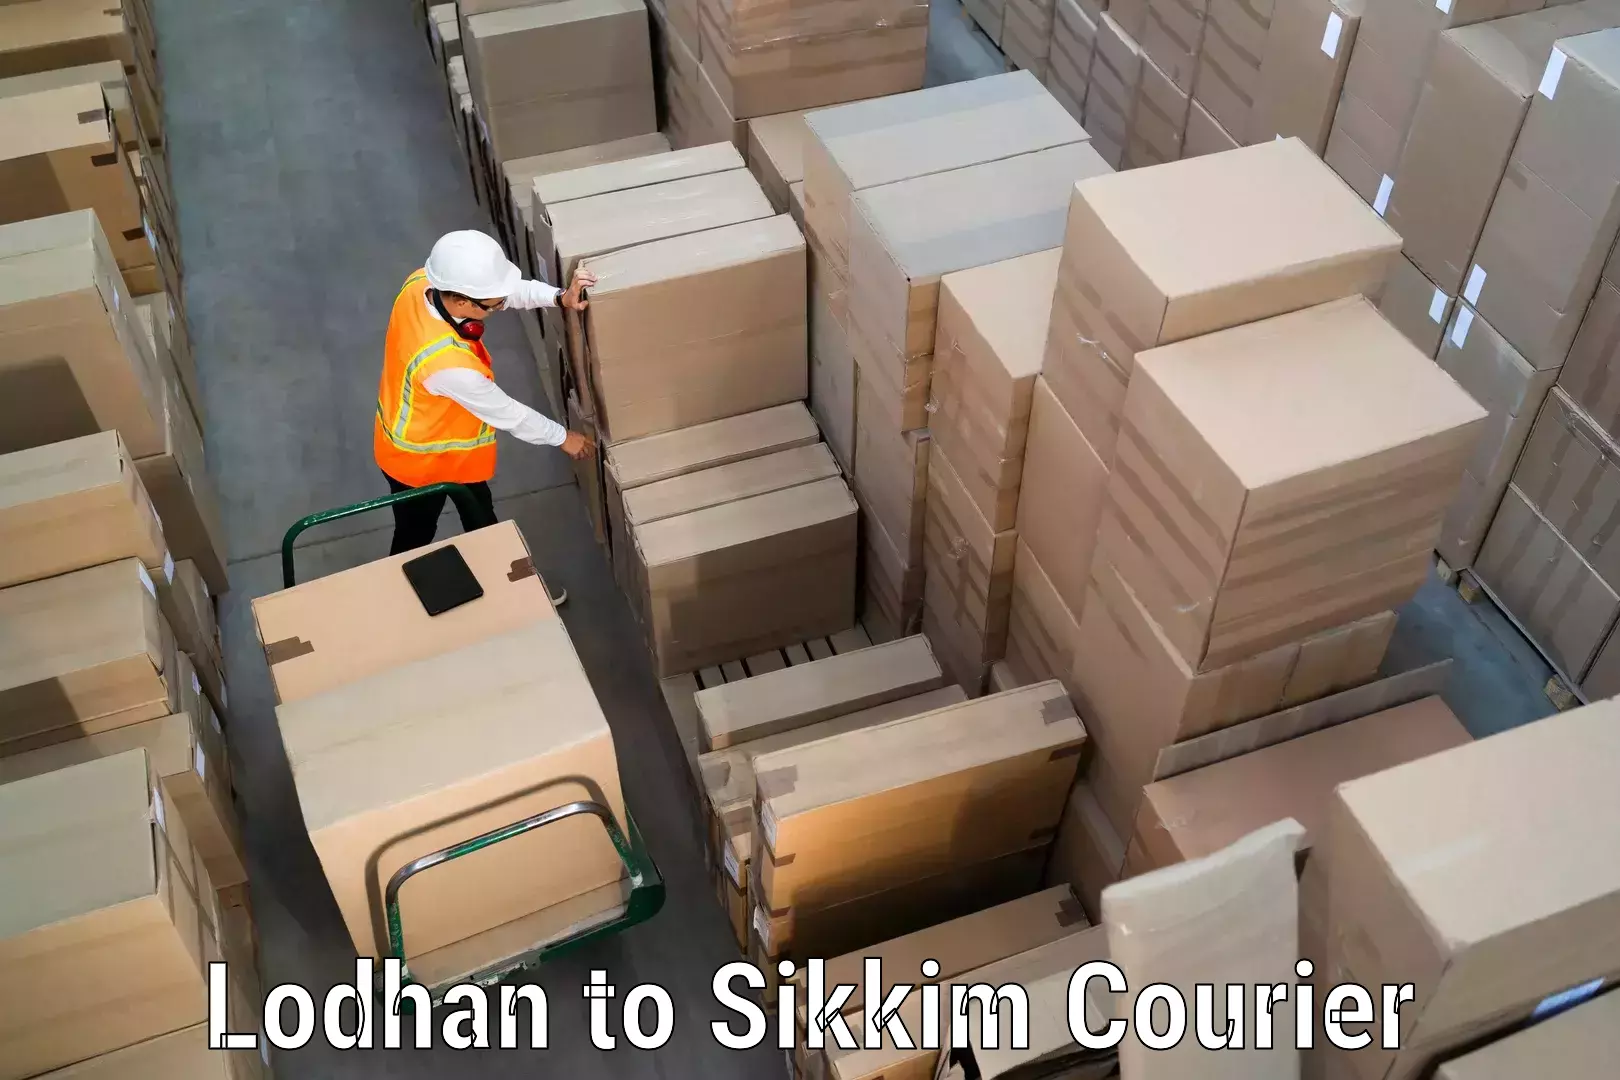 Sustainable delivery practices Lodhan to Sikkim